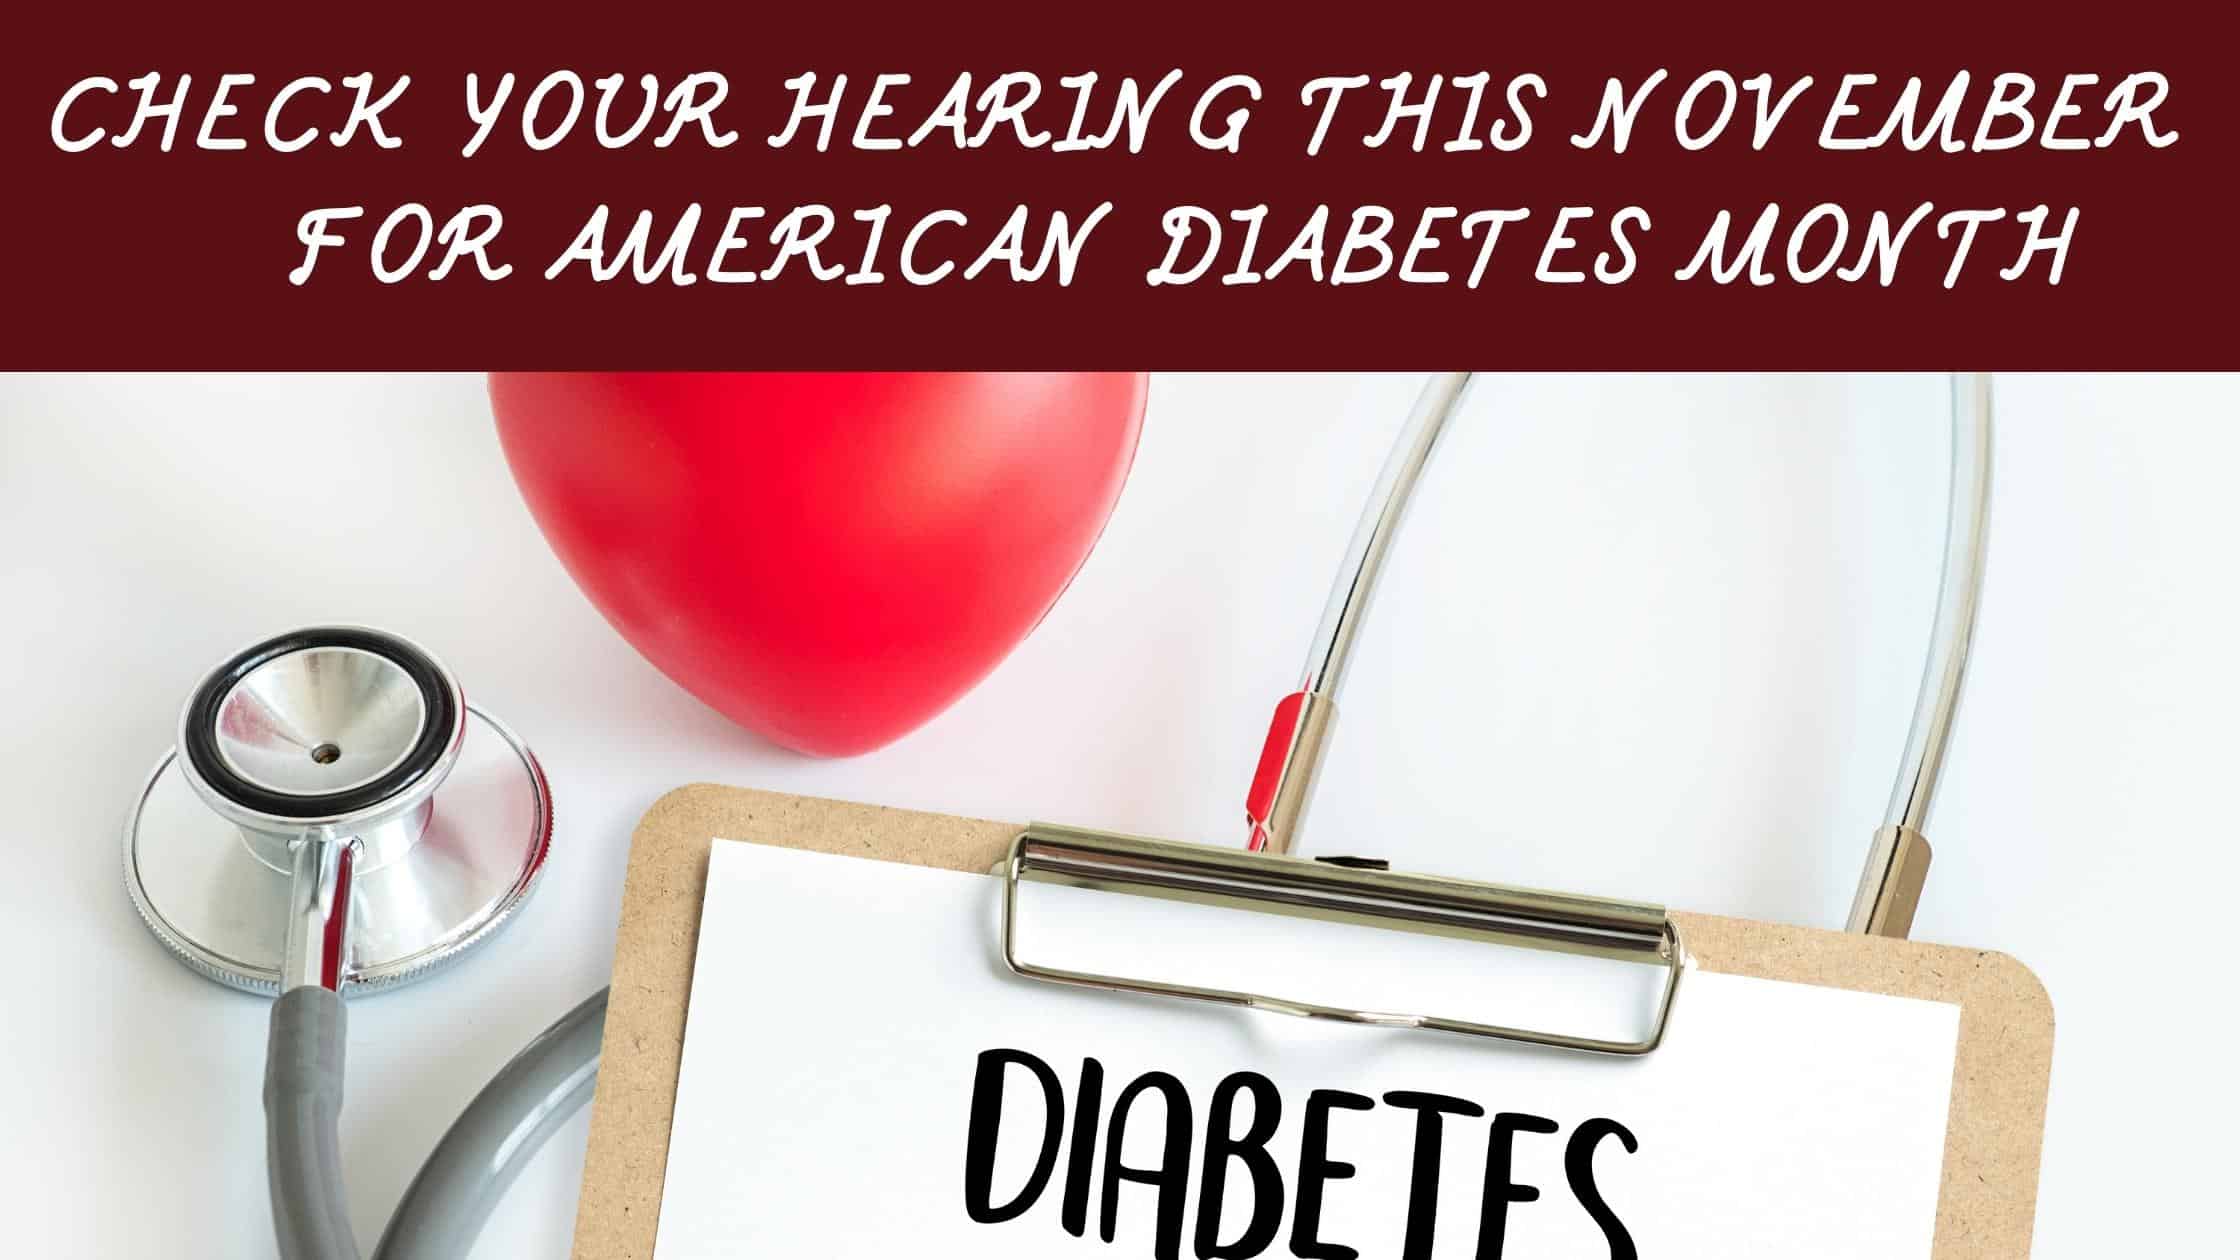 Featured image for “Check Your Hearing This November for American Diabetes Month”